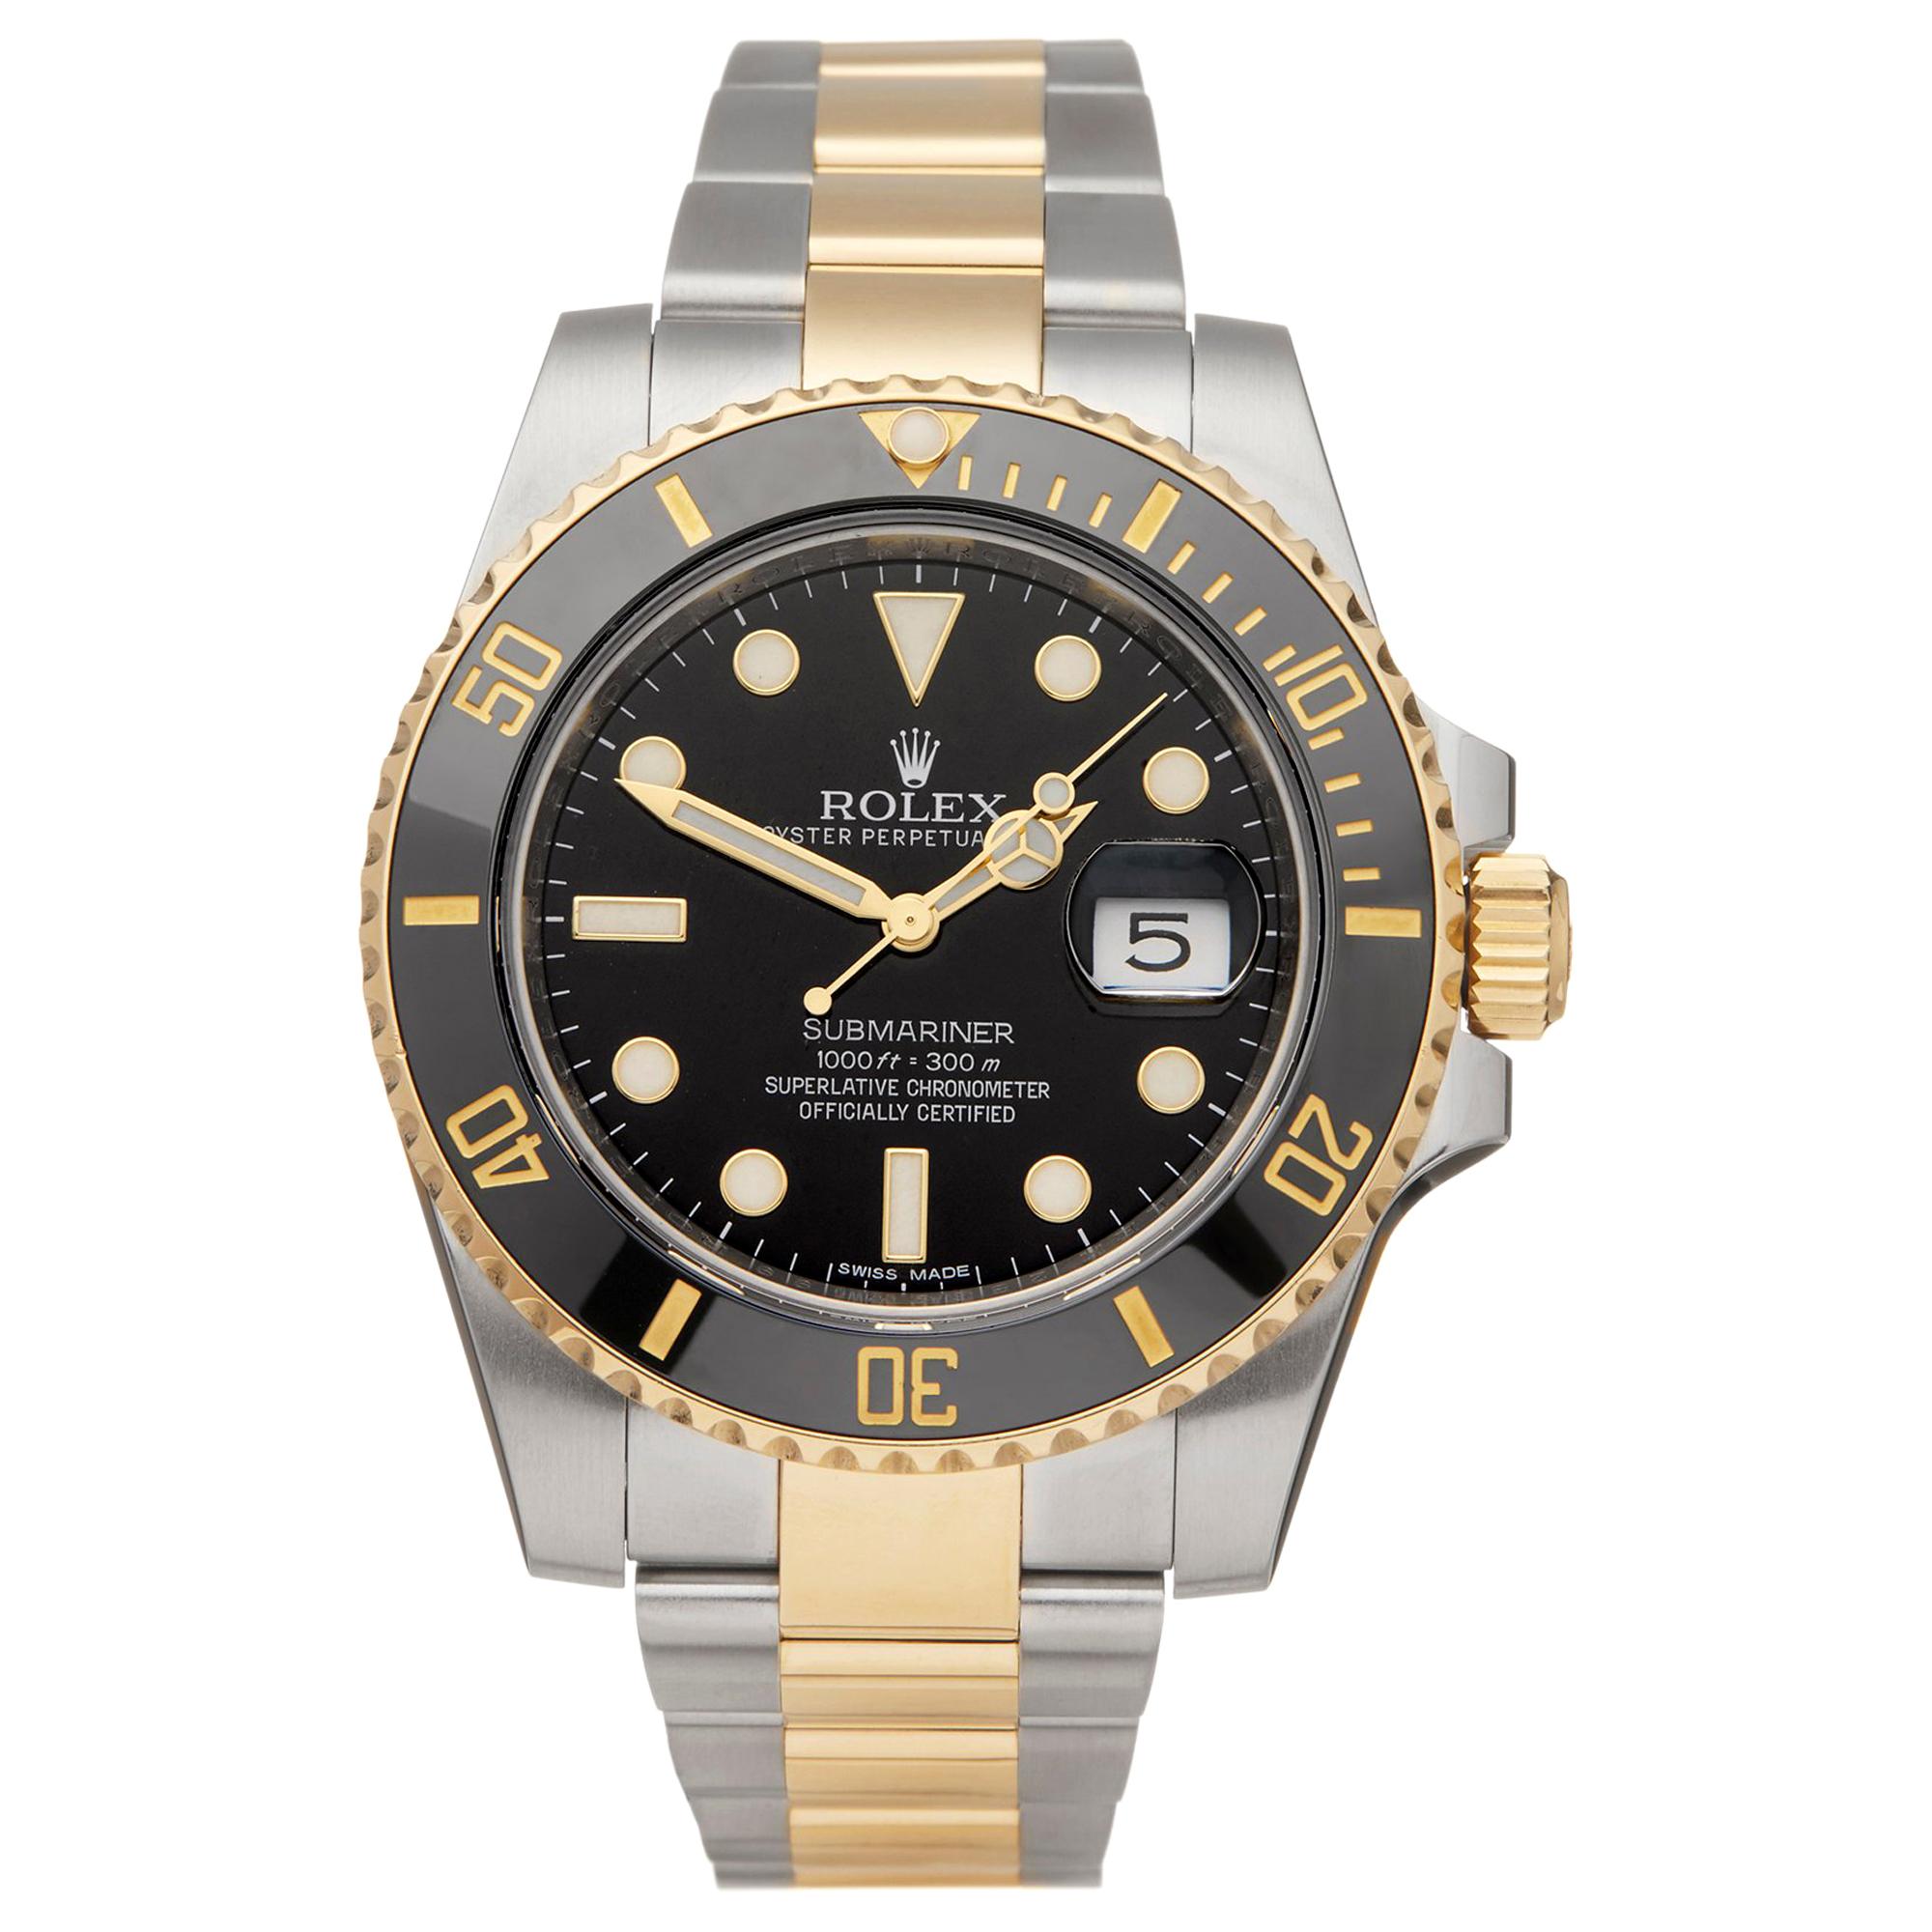 Rolex Submariner Stainless Steel and 18K Yellow Gold 116613LN